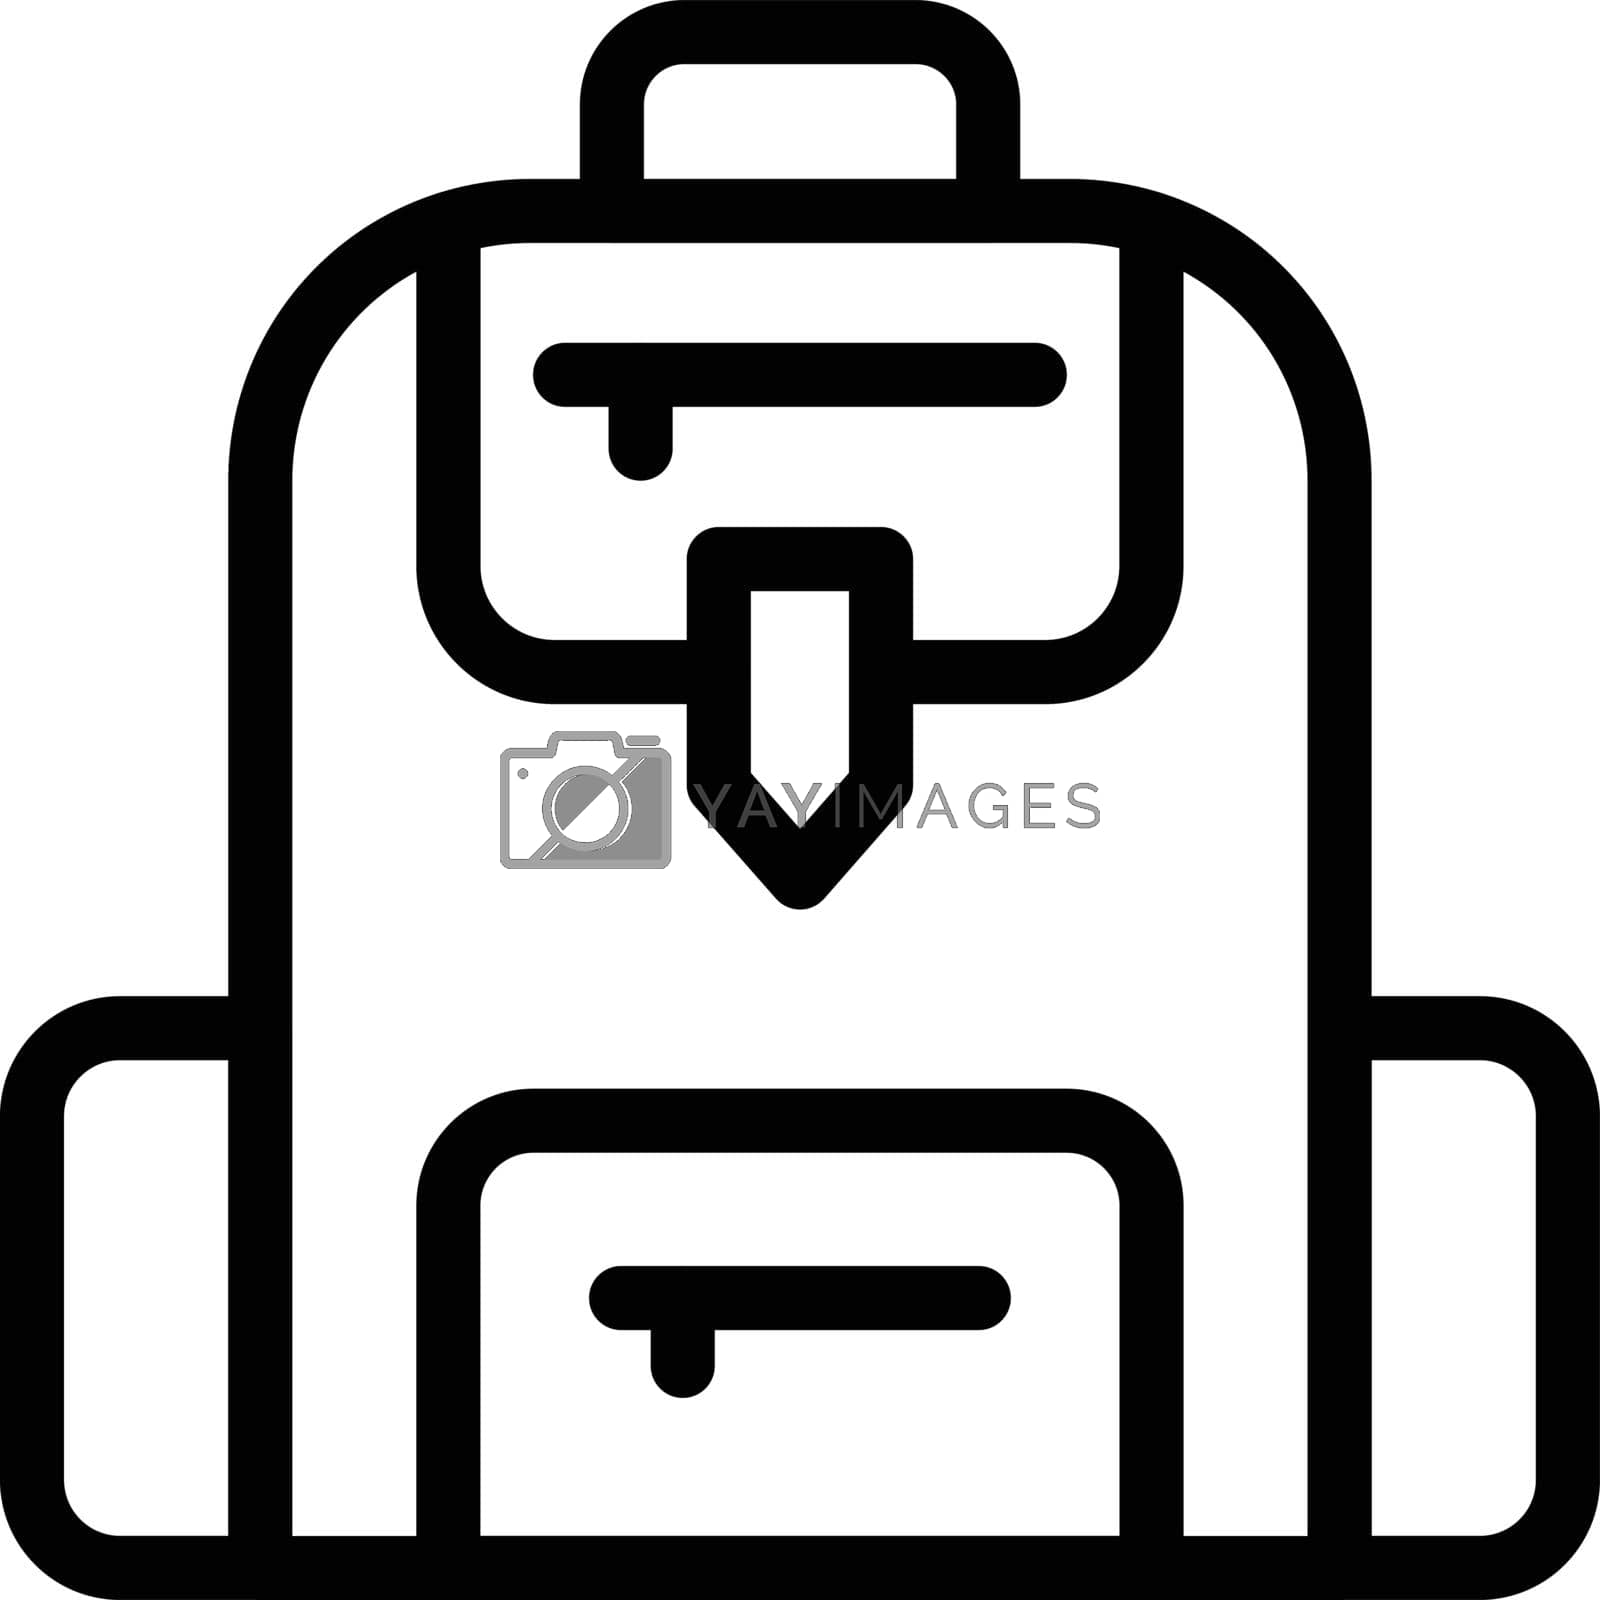 Royalty free image of backpack by vectorstall